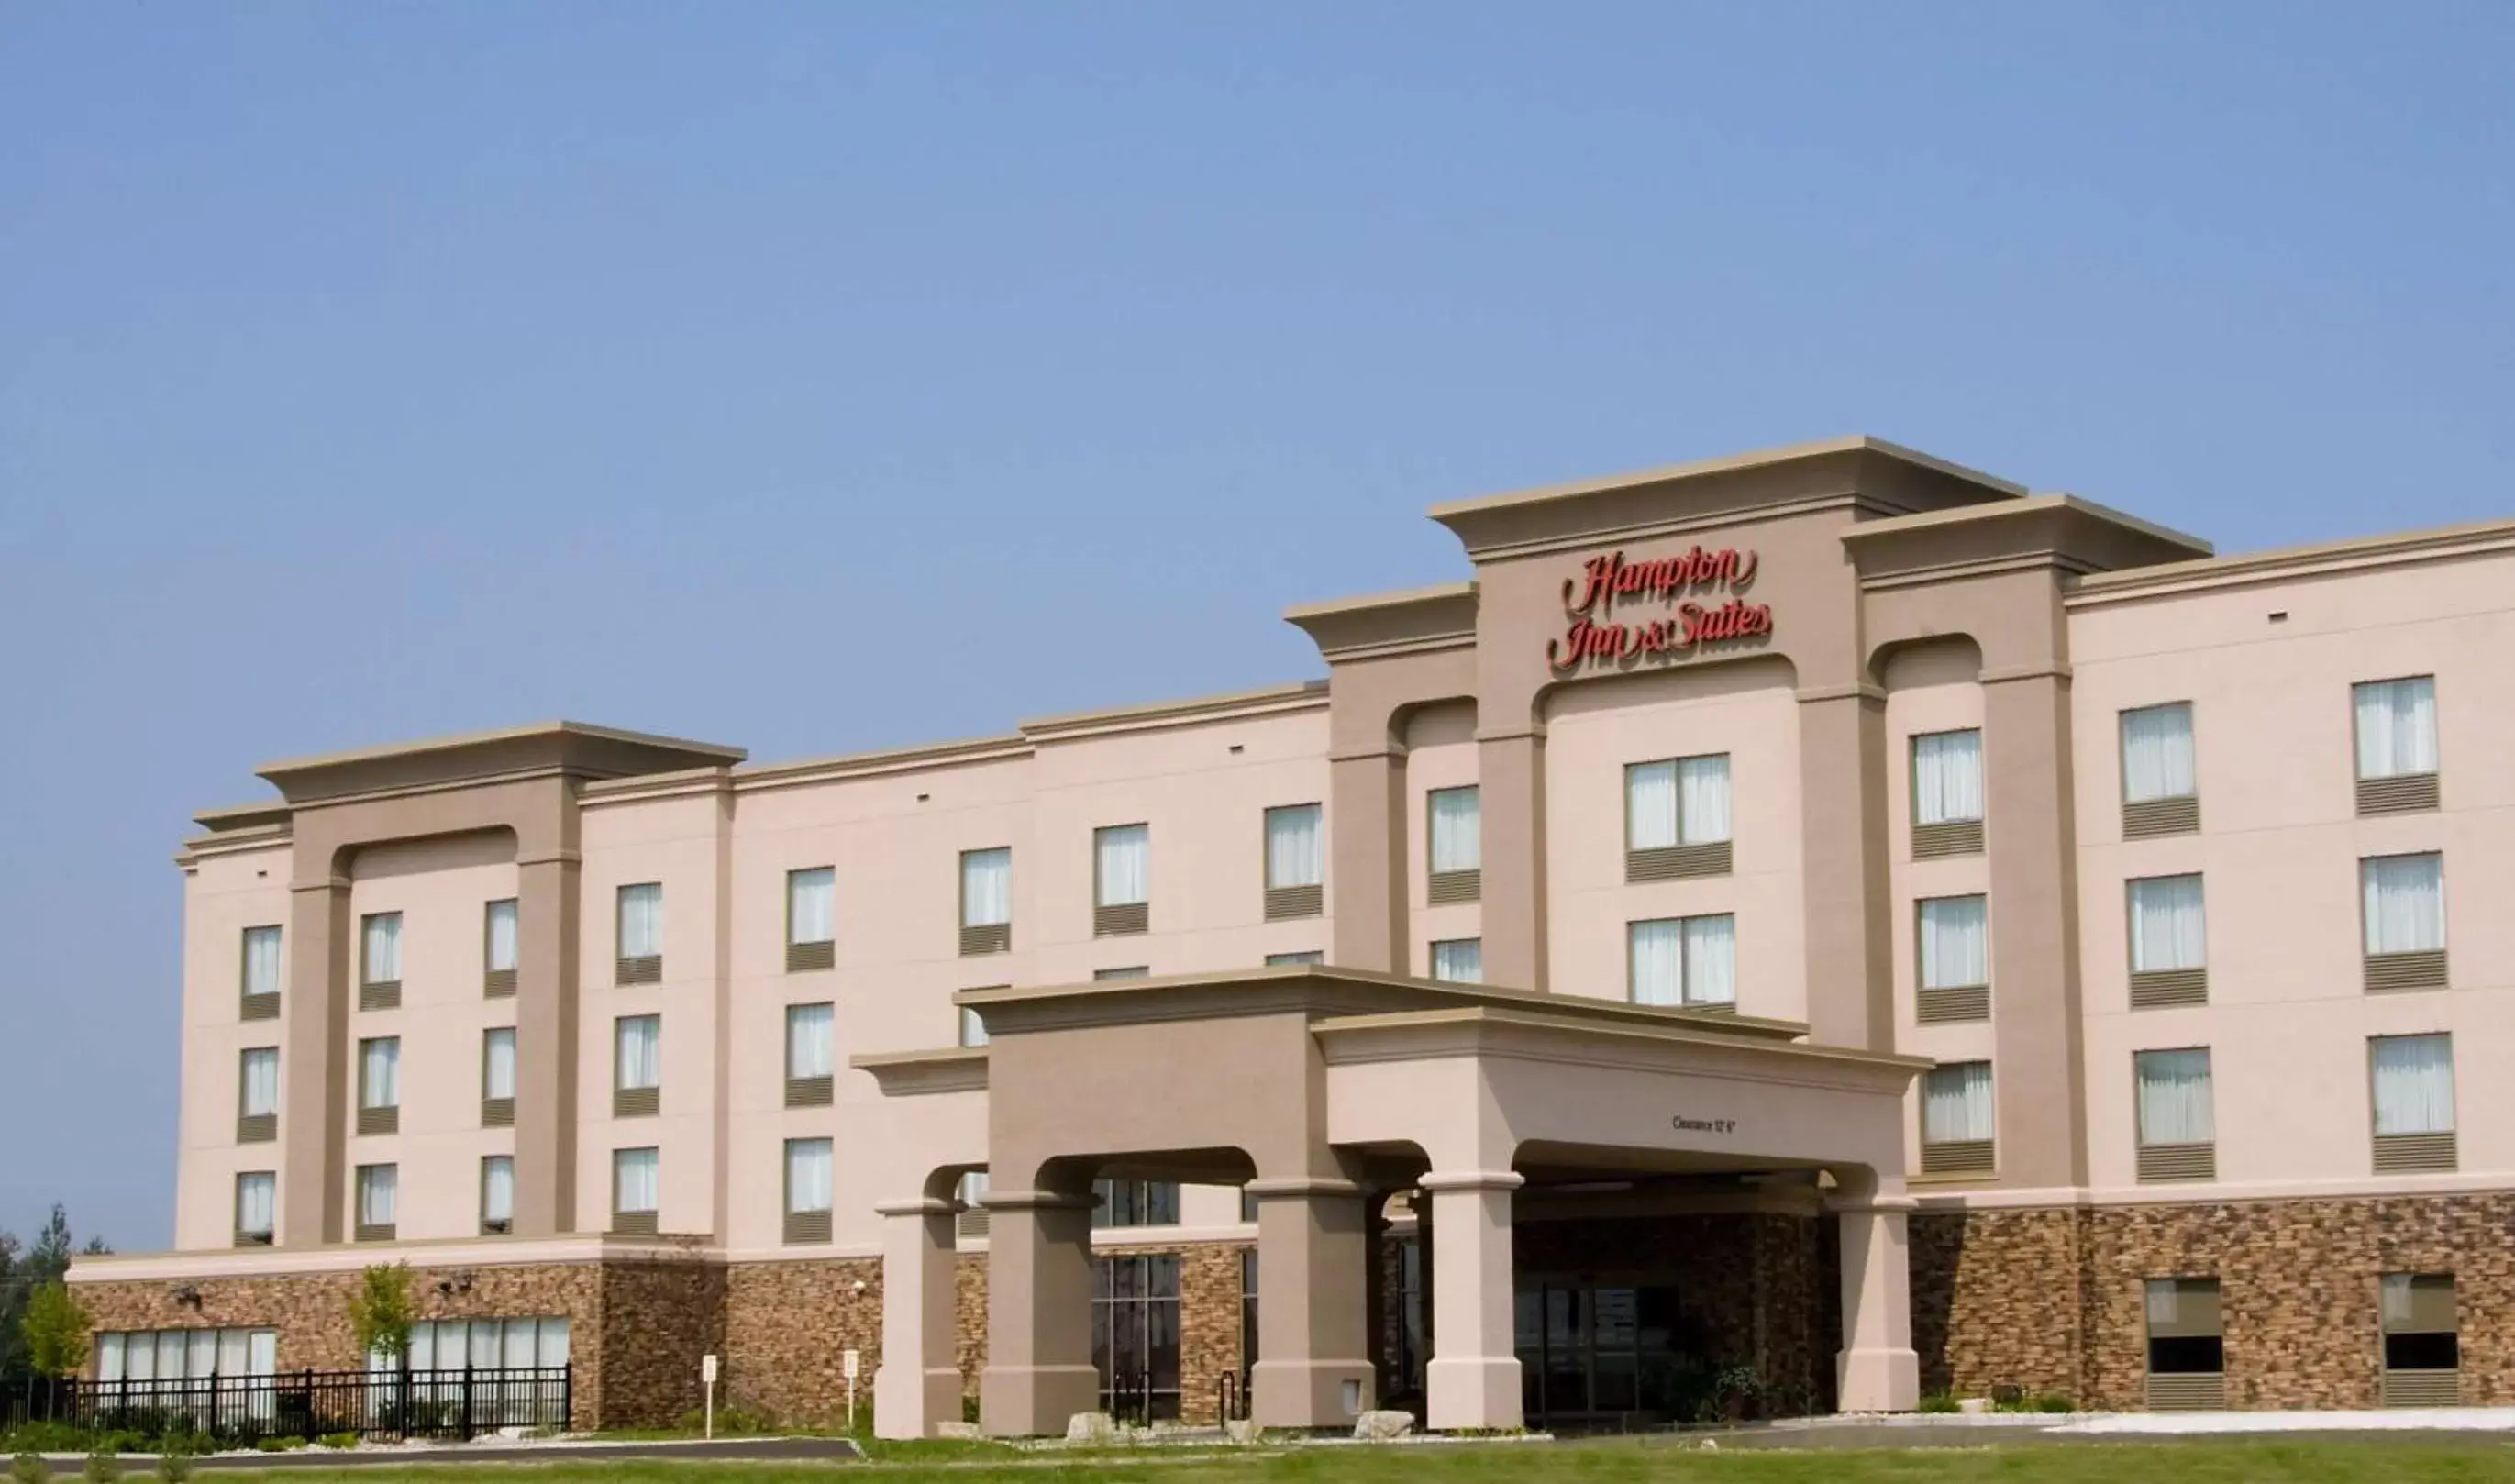 Property Building in Hampton Inn By Hilton & Suites Guelph, Ontario, Canada